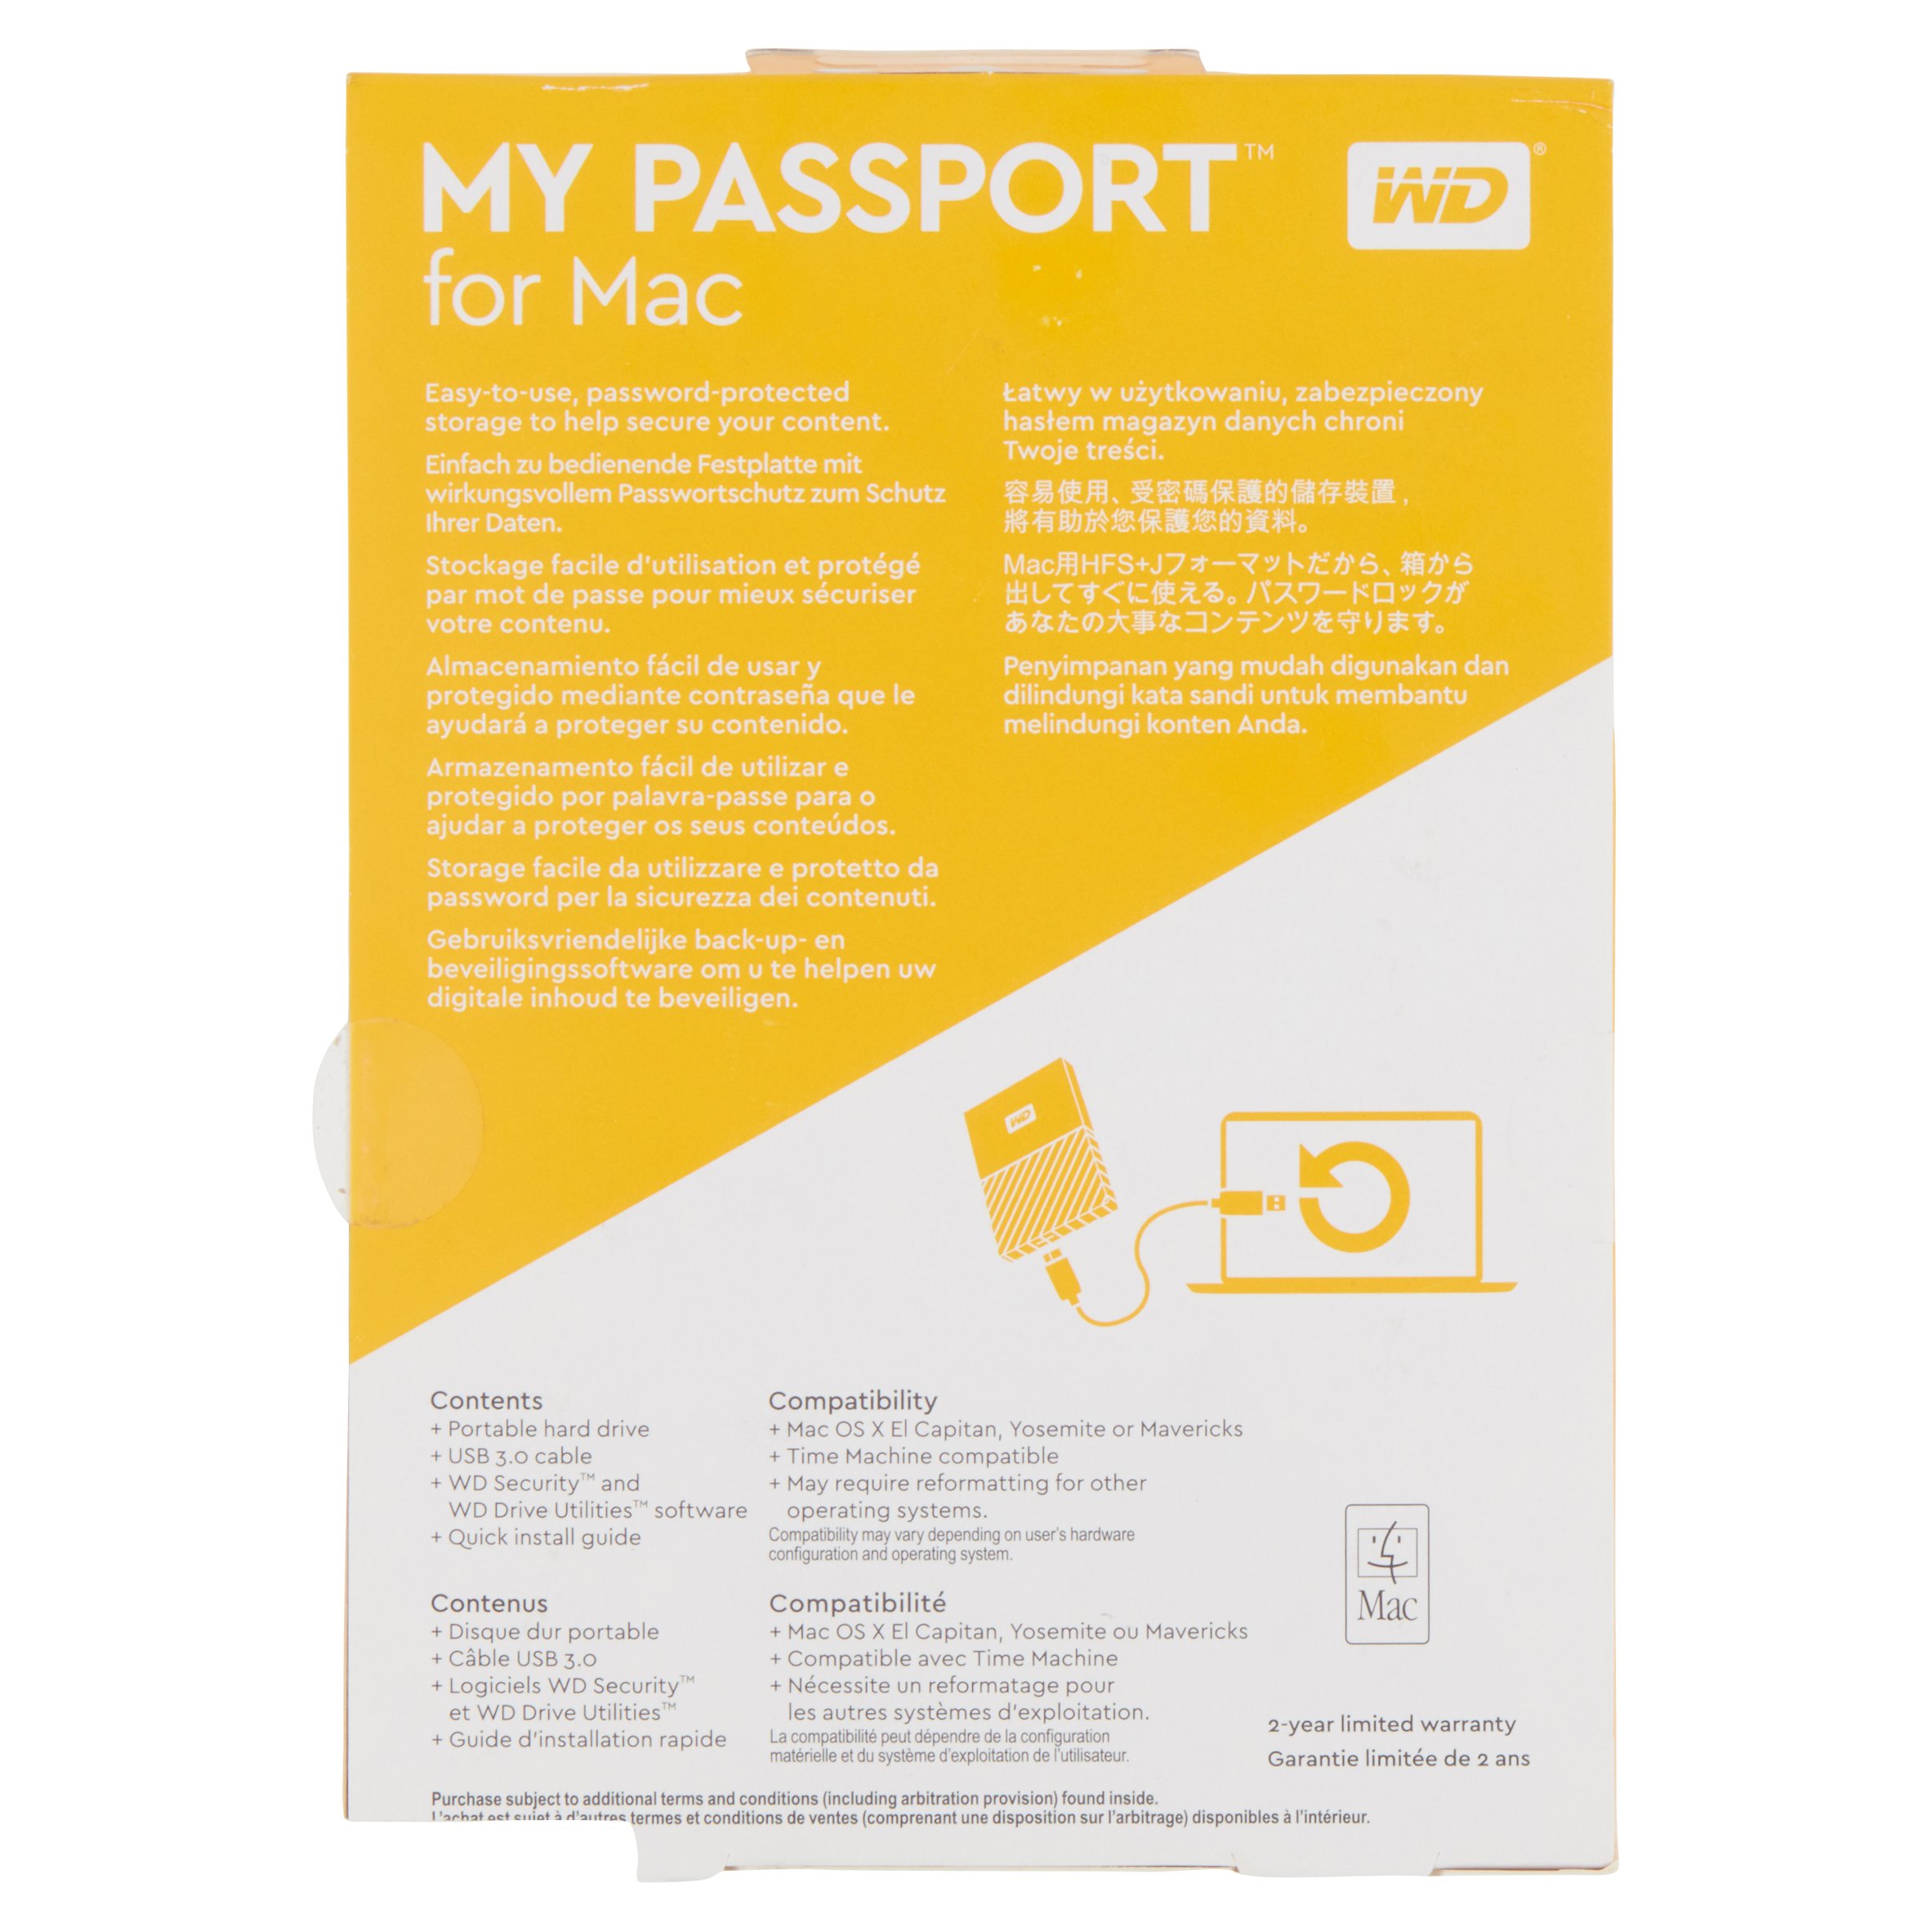 How To Use Wd My Passport For Mac On Pc